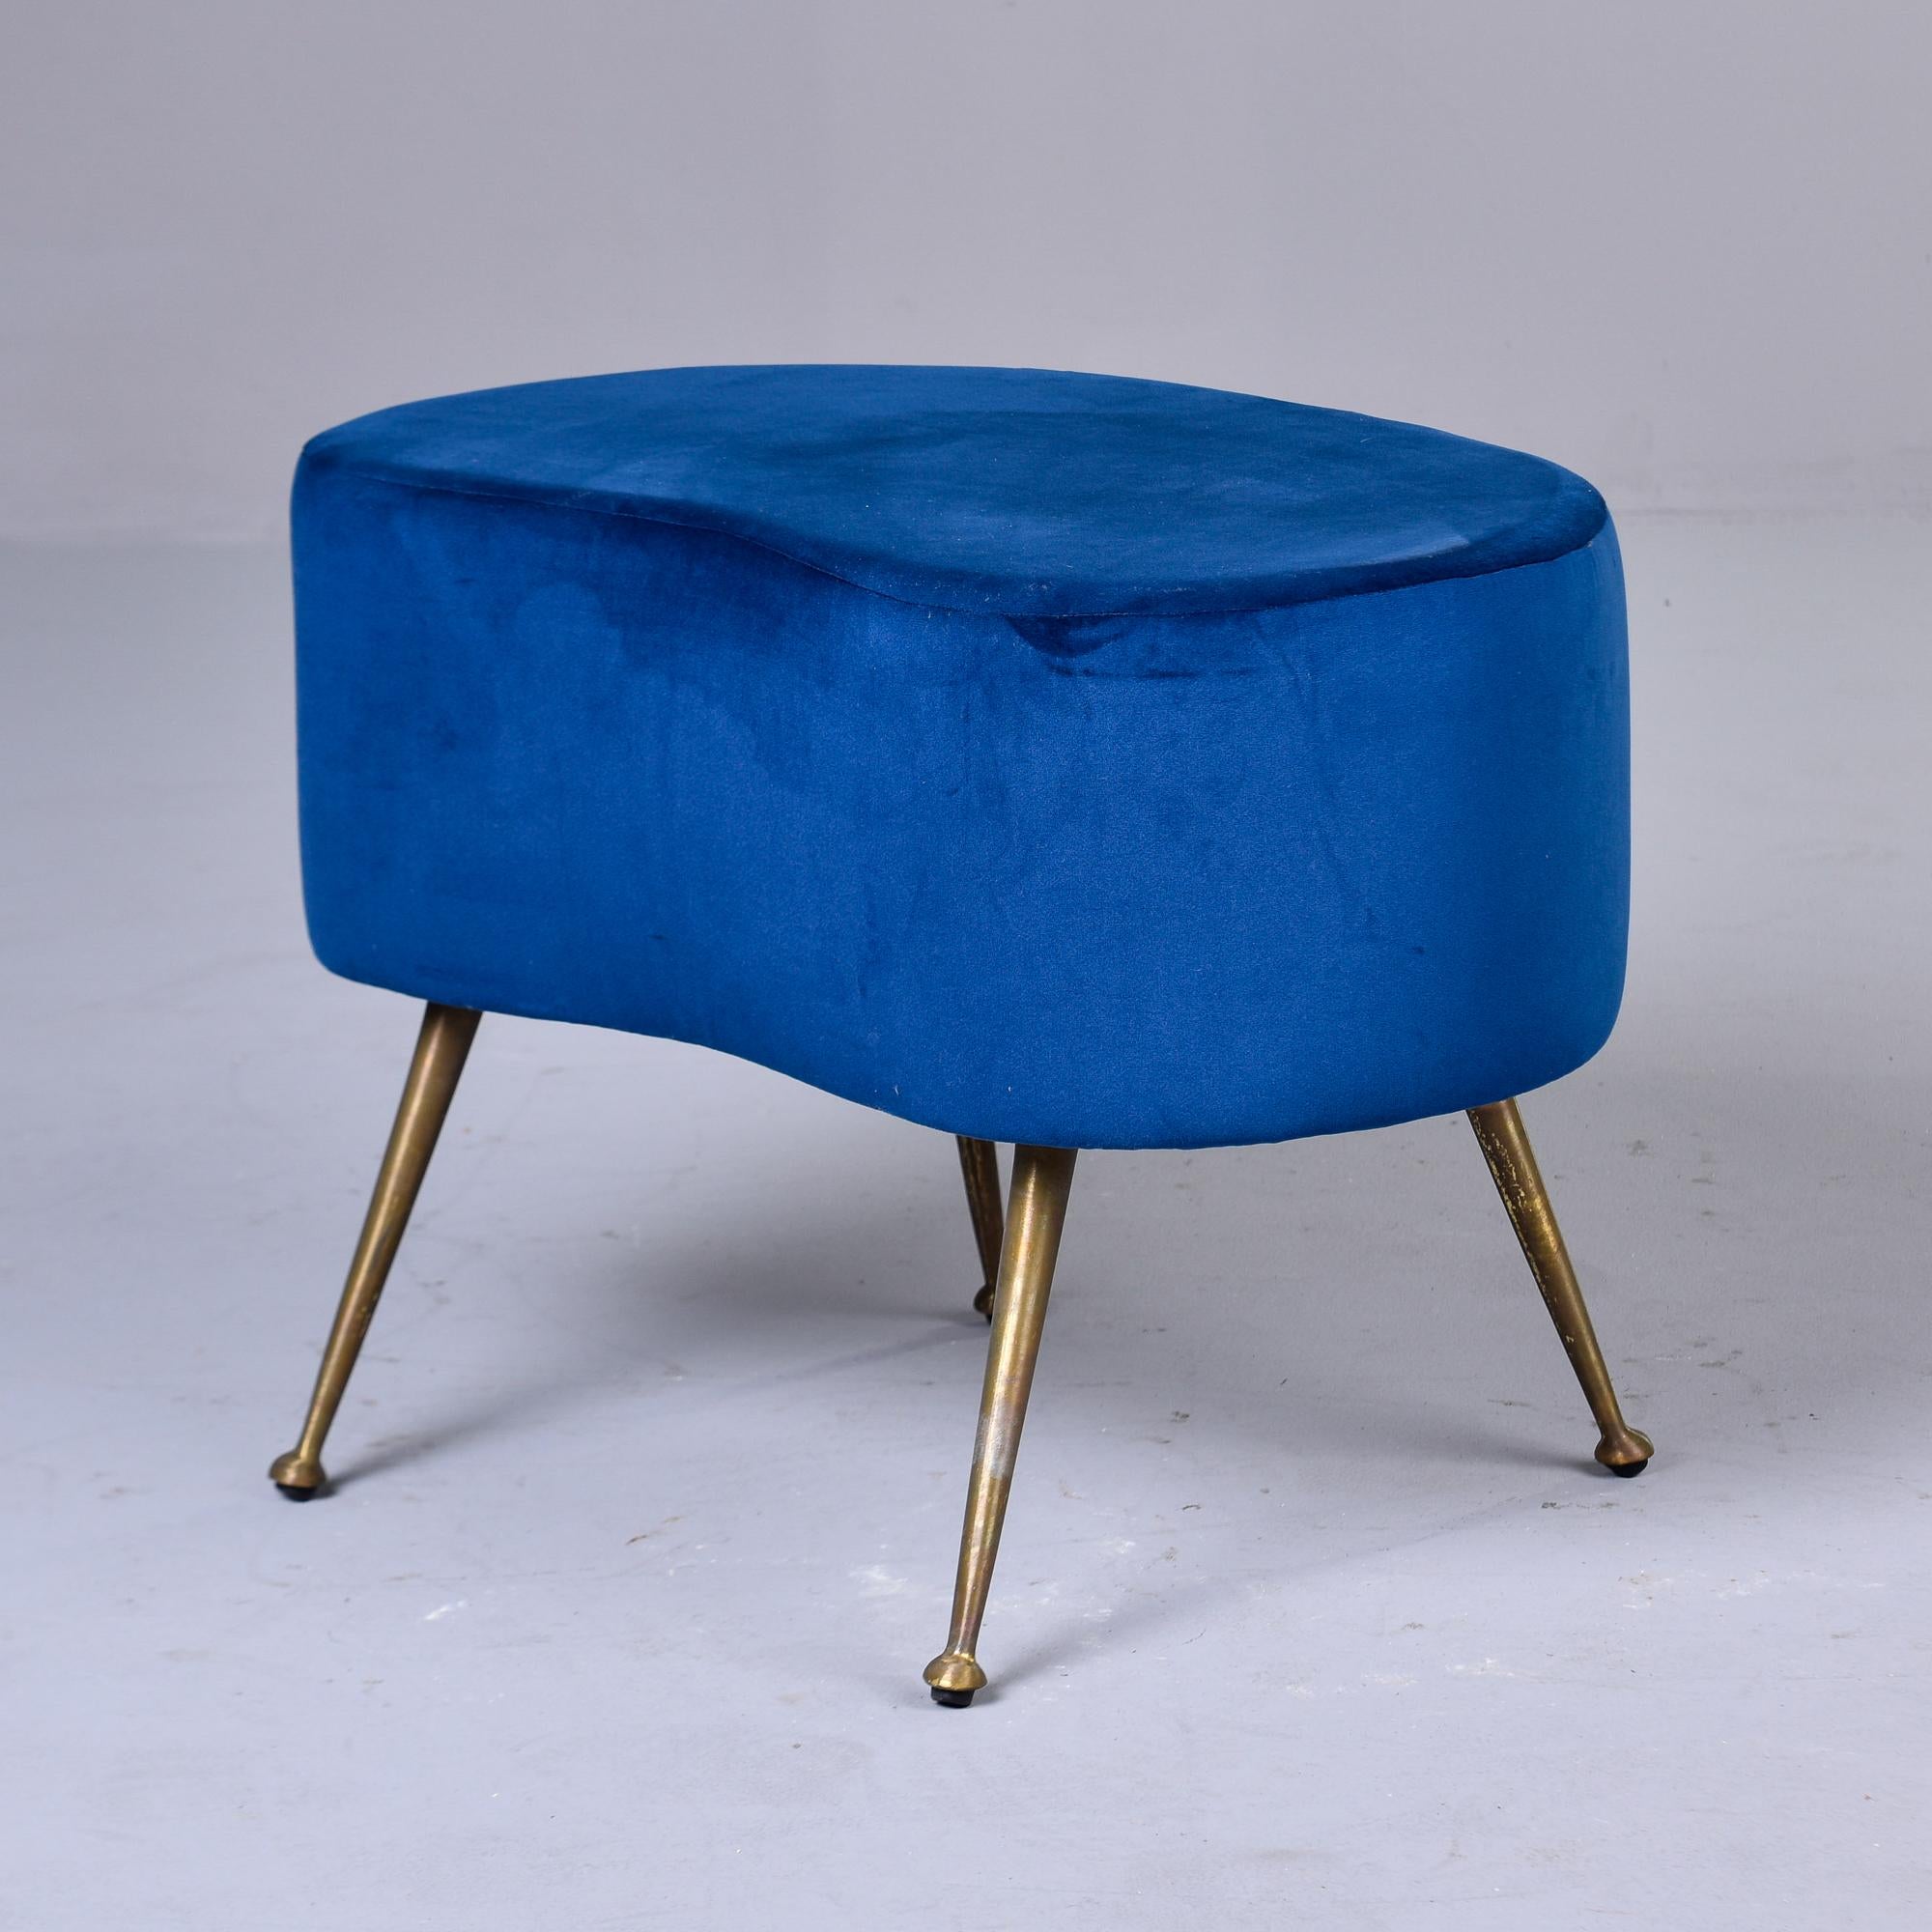 Italian Mid Century Blue Kidney Shaped Stool with Brass Legs In Good Condition For Sale In Troy, MI